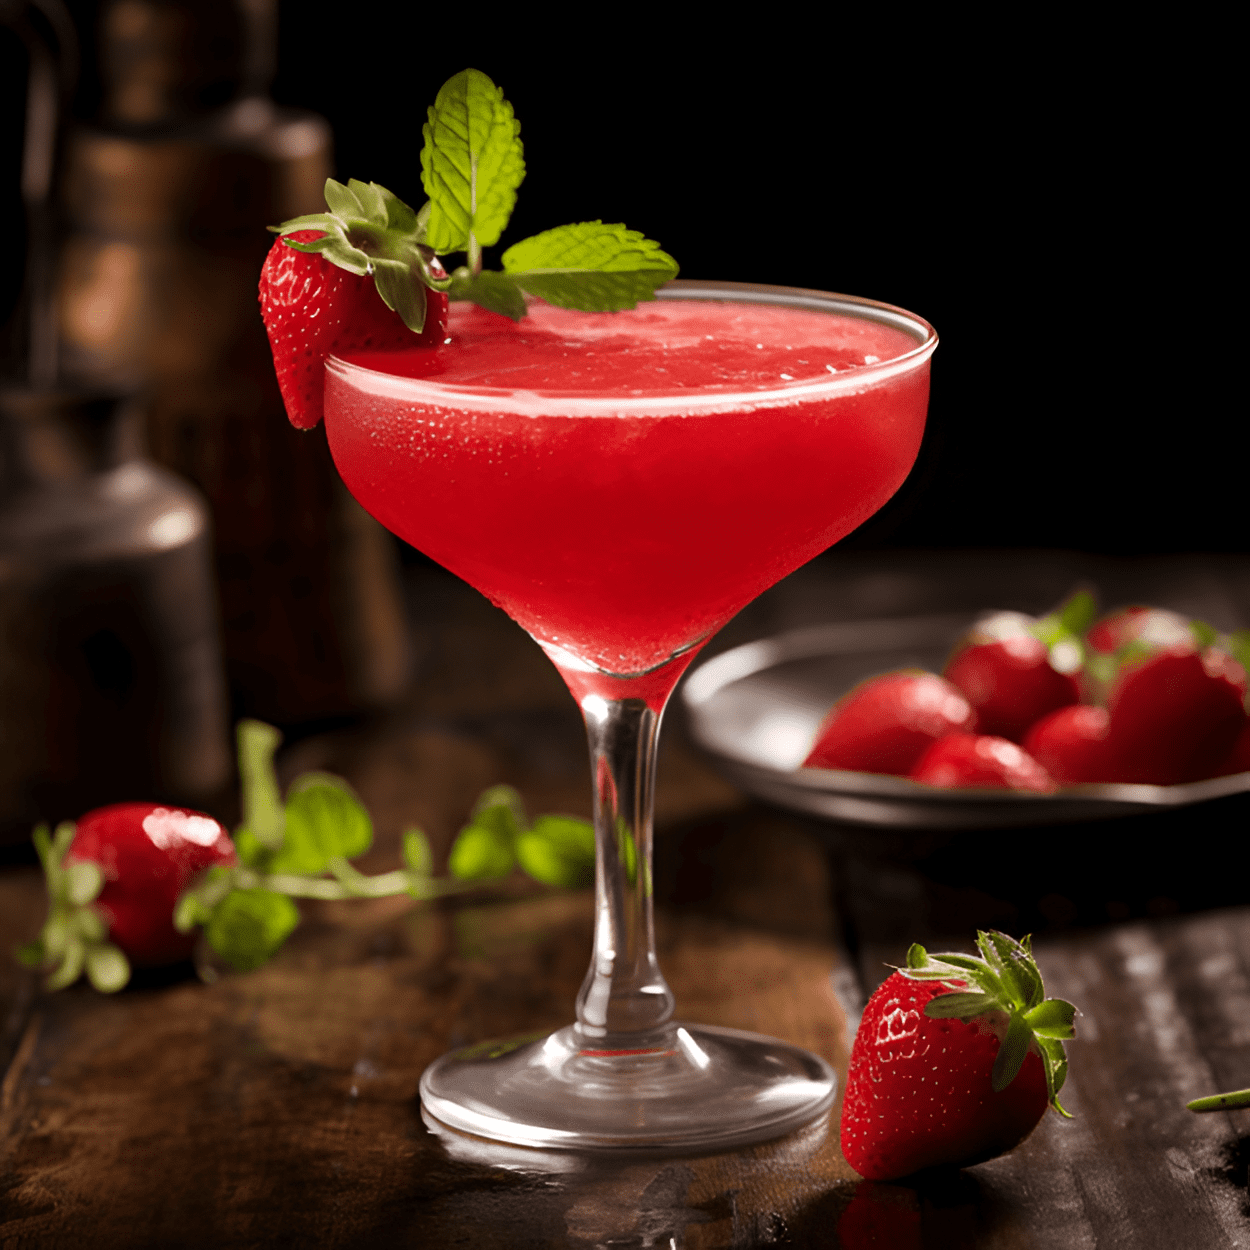 Sweet Revenge Cocktail Recipe - Sweet Revenge is a cocktail that is sweet, fruity, and strong. It has a vibrant strawberry flavor with a hint of citrus from the lemon, and the strong kick of the whiskey gives it a powerful punch.